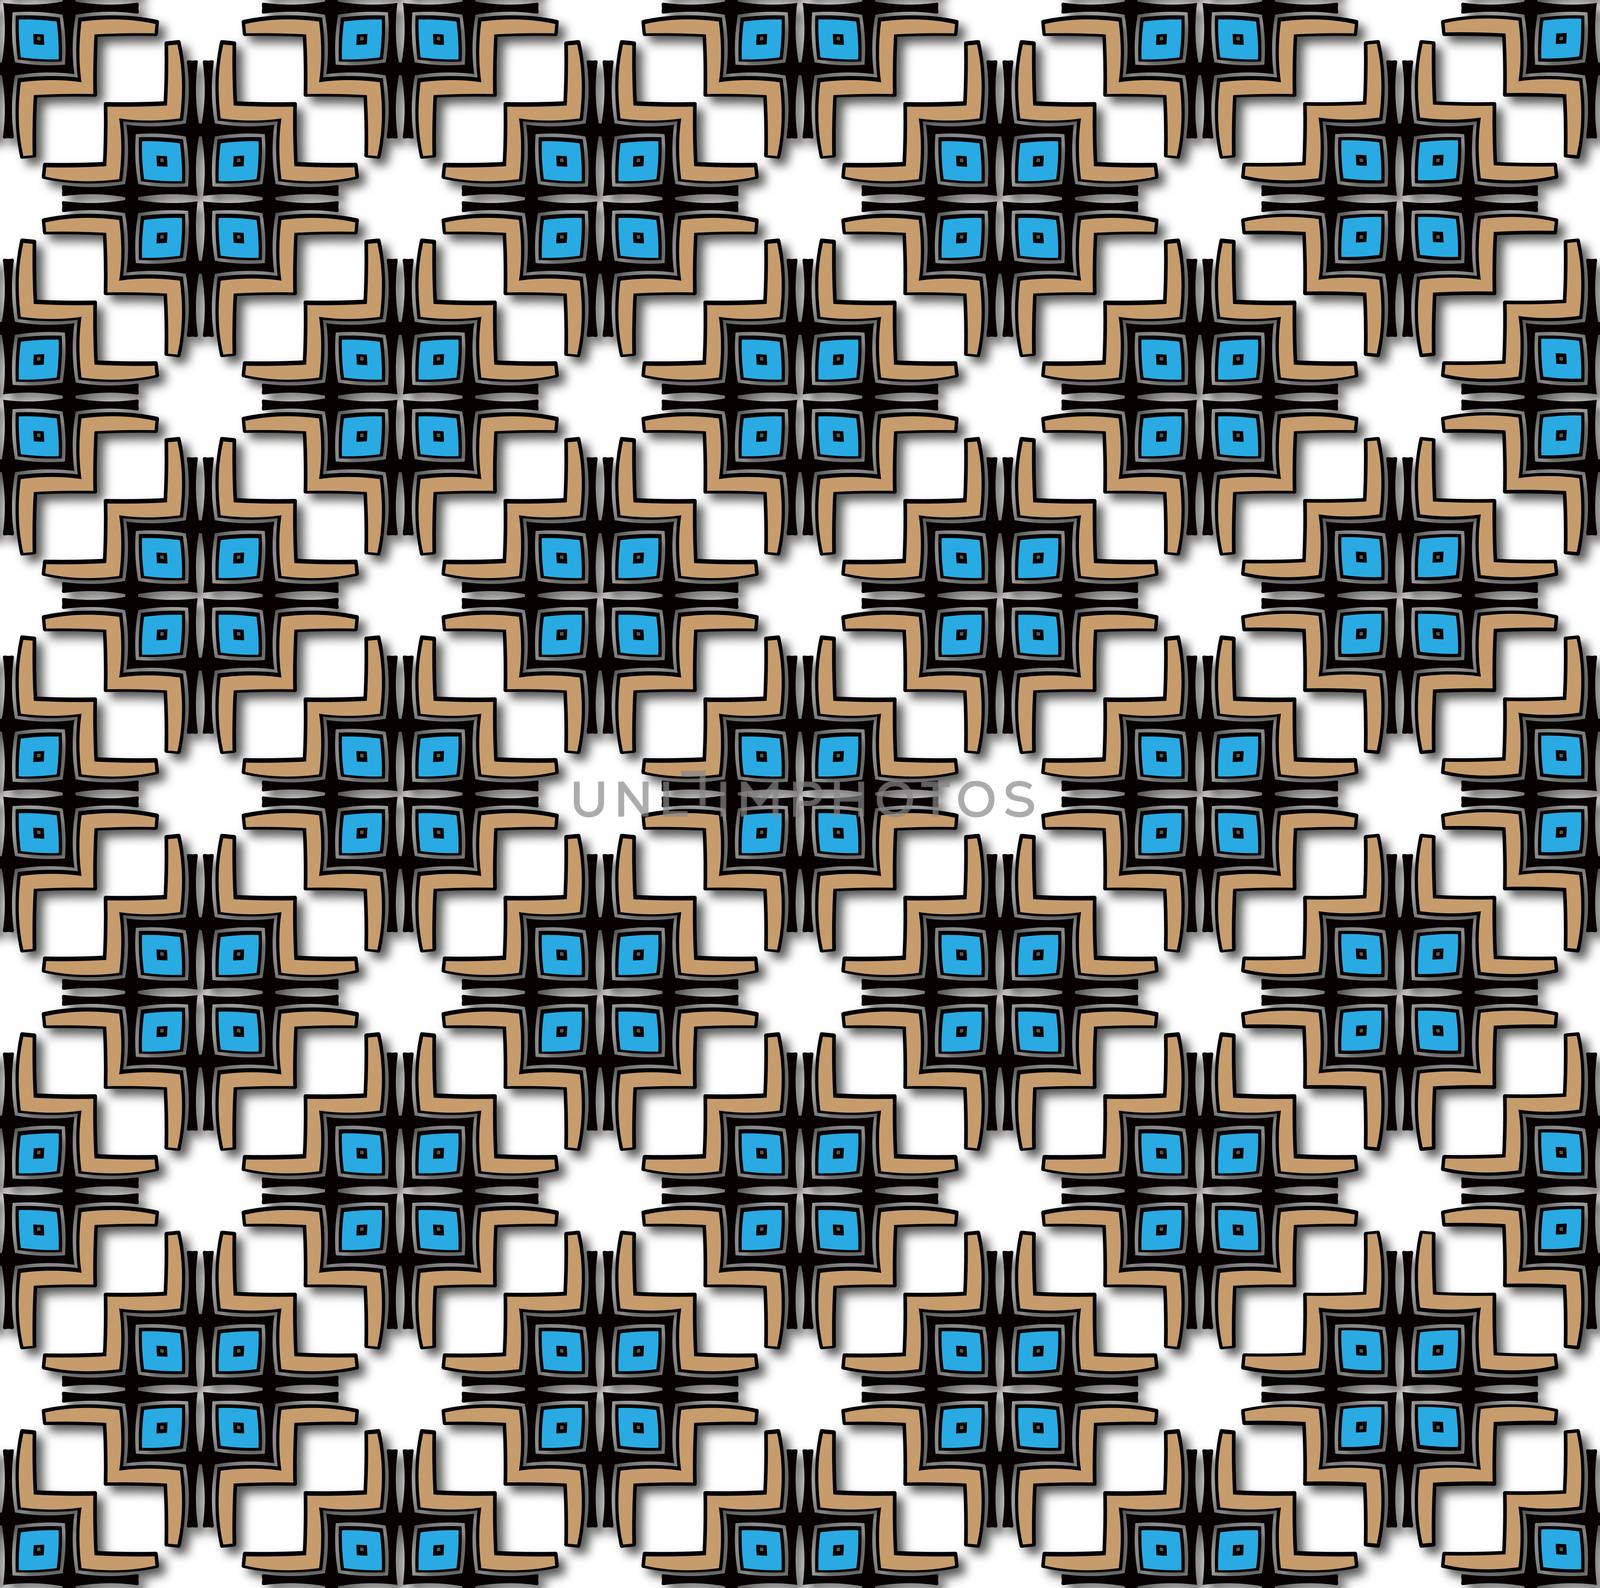 background or fabric Abstract inca cross pattern blue and brown color